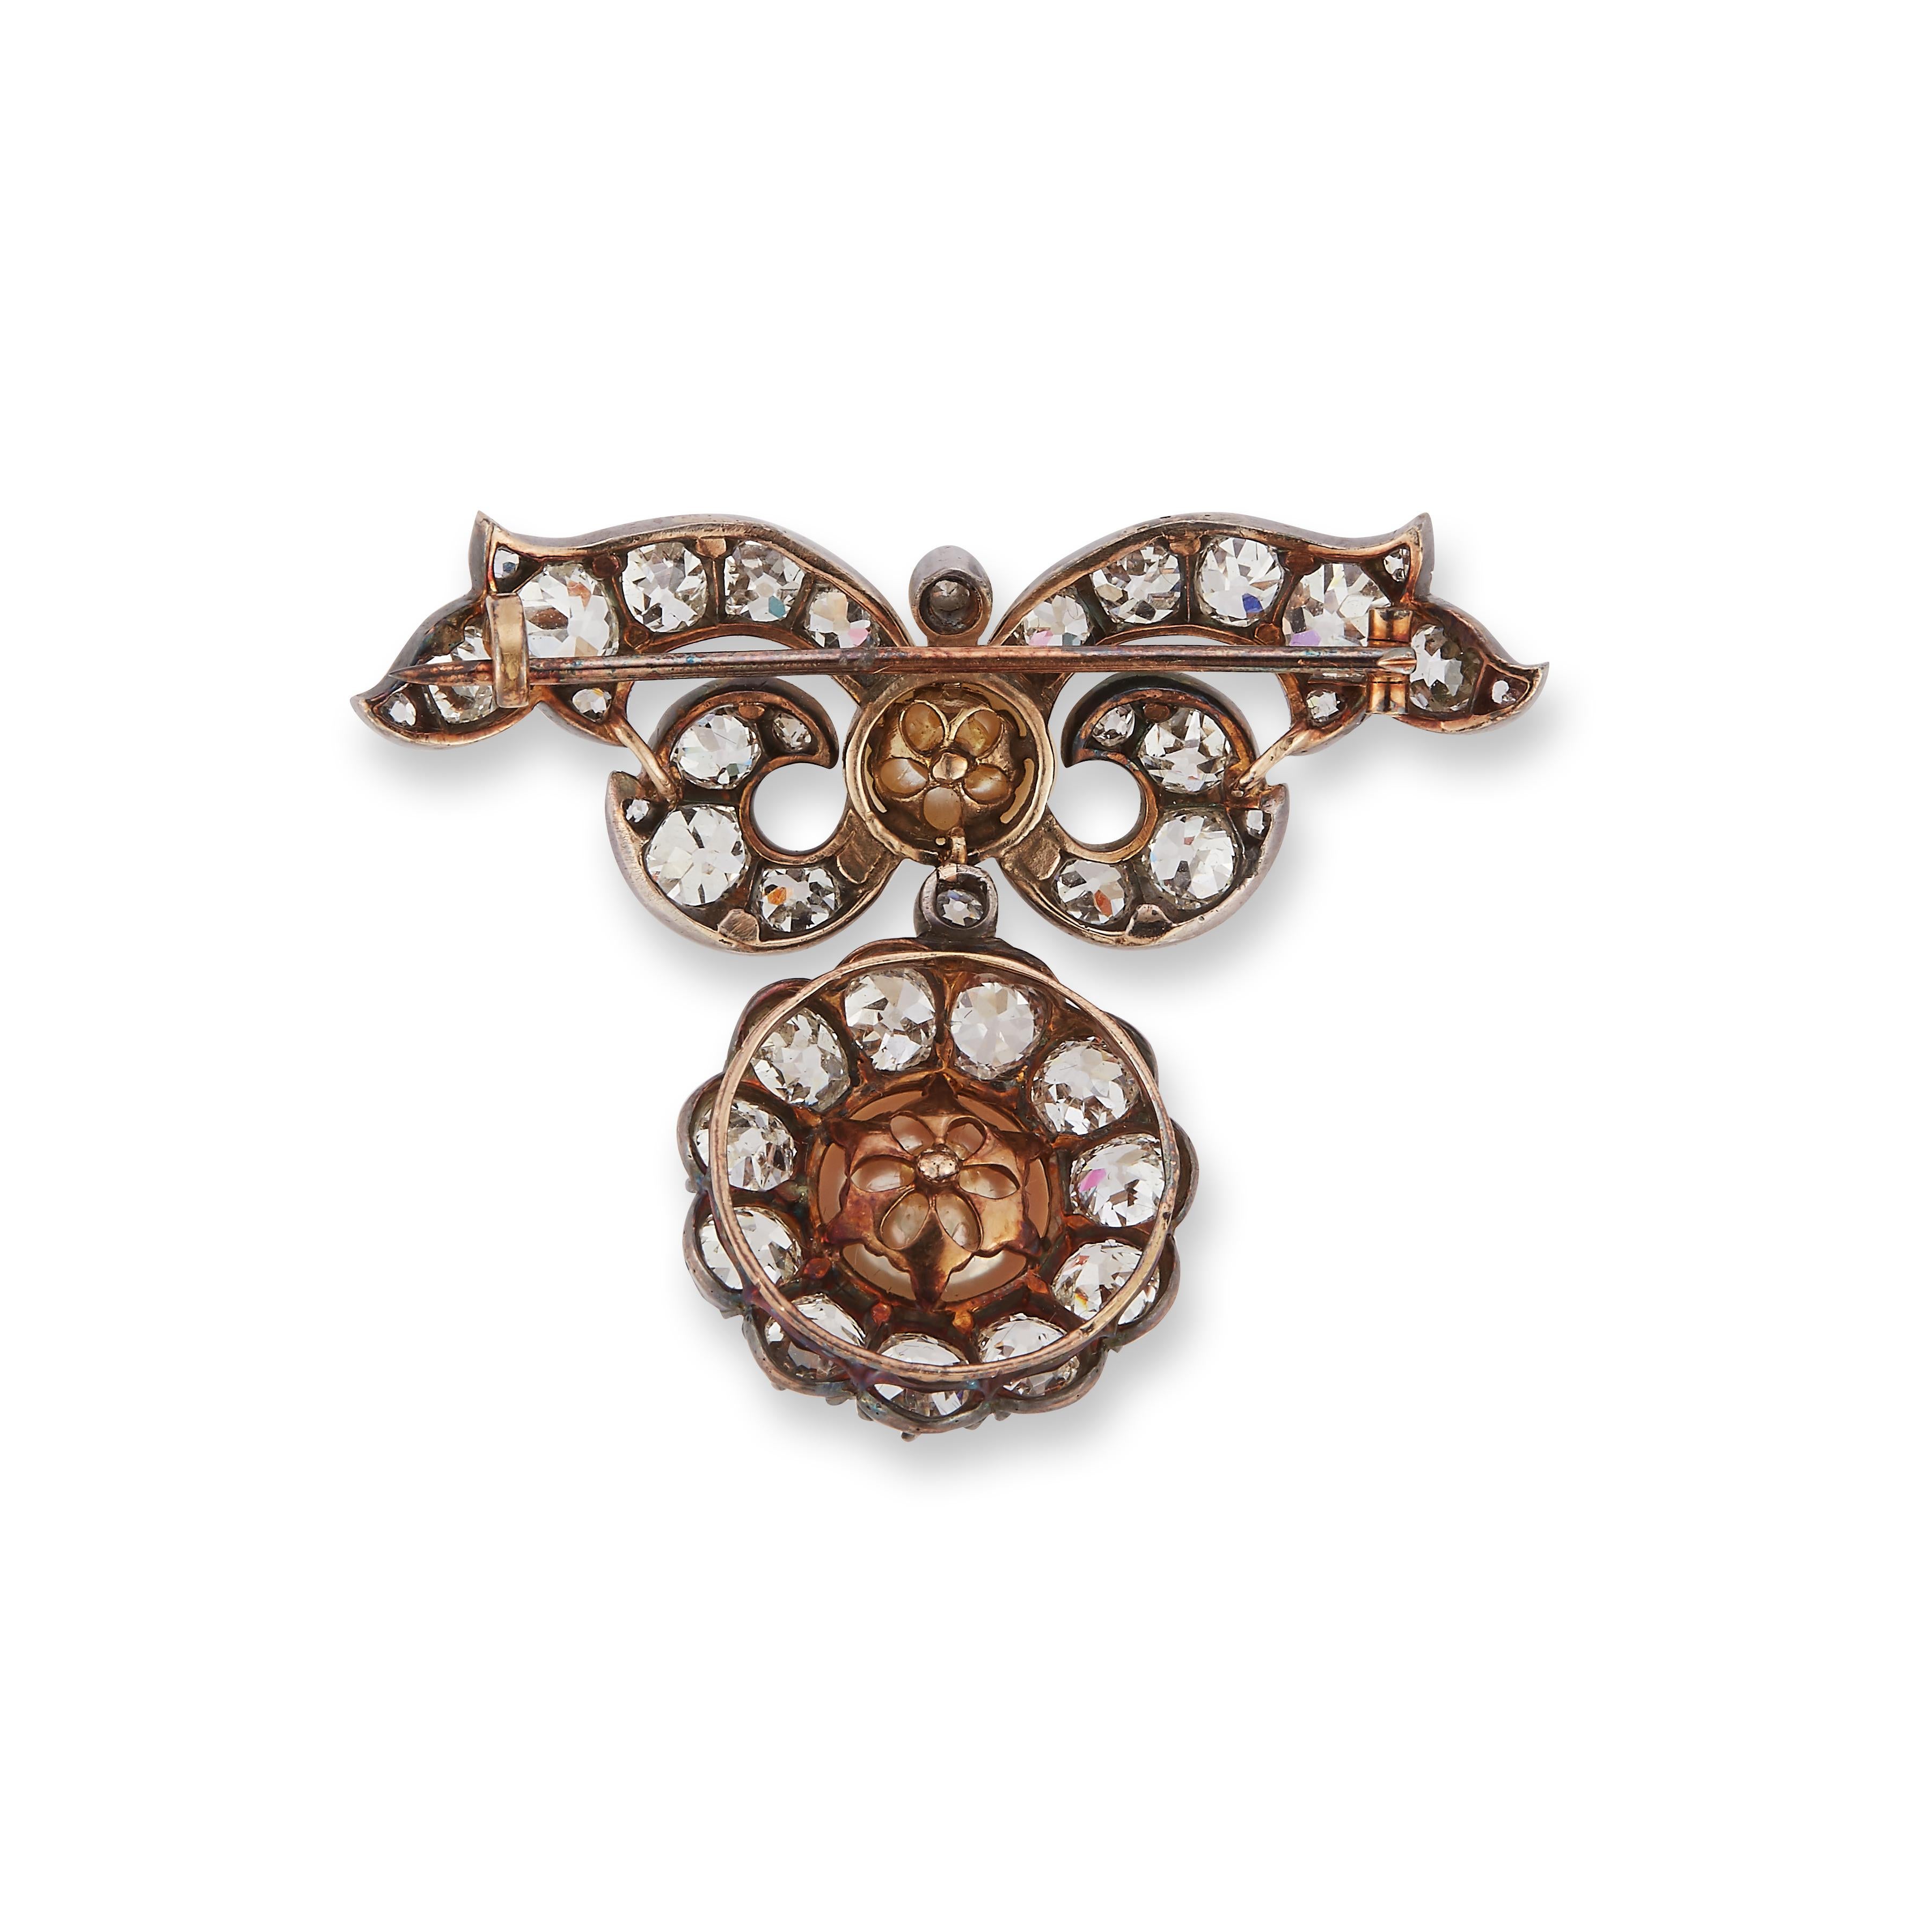 Estate Jewelry Curated by Parulina- Noble Collection Brooch with a 9.6mm and 8.7mm Natural Pearls surrounded by approximately 7.00ct of Old European Cut Diamonds. 

Metal: 18K Gold
Gemstone Size: 9.6mm and 8.7mm Natural Pearls
Diamond Carat Weight: